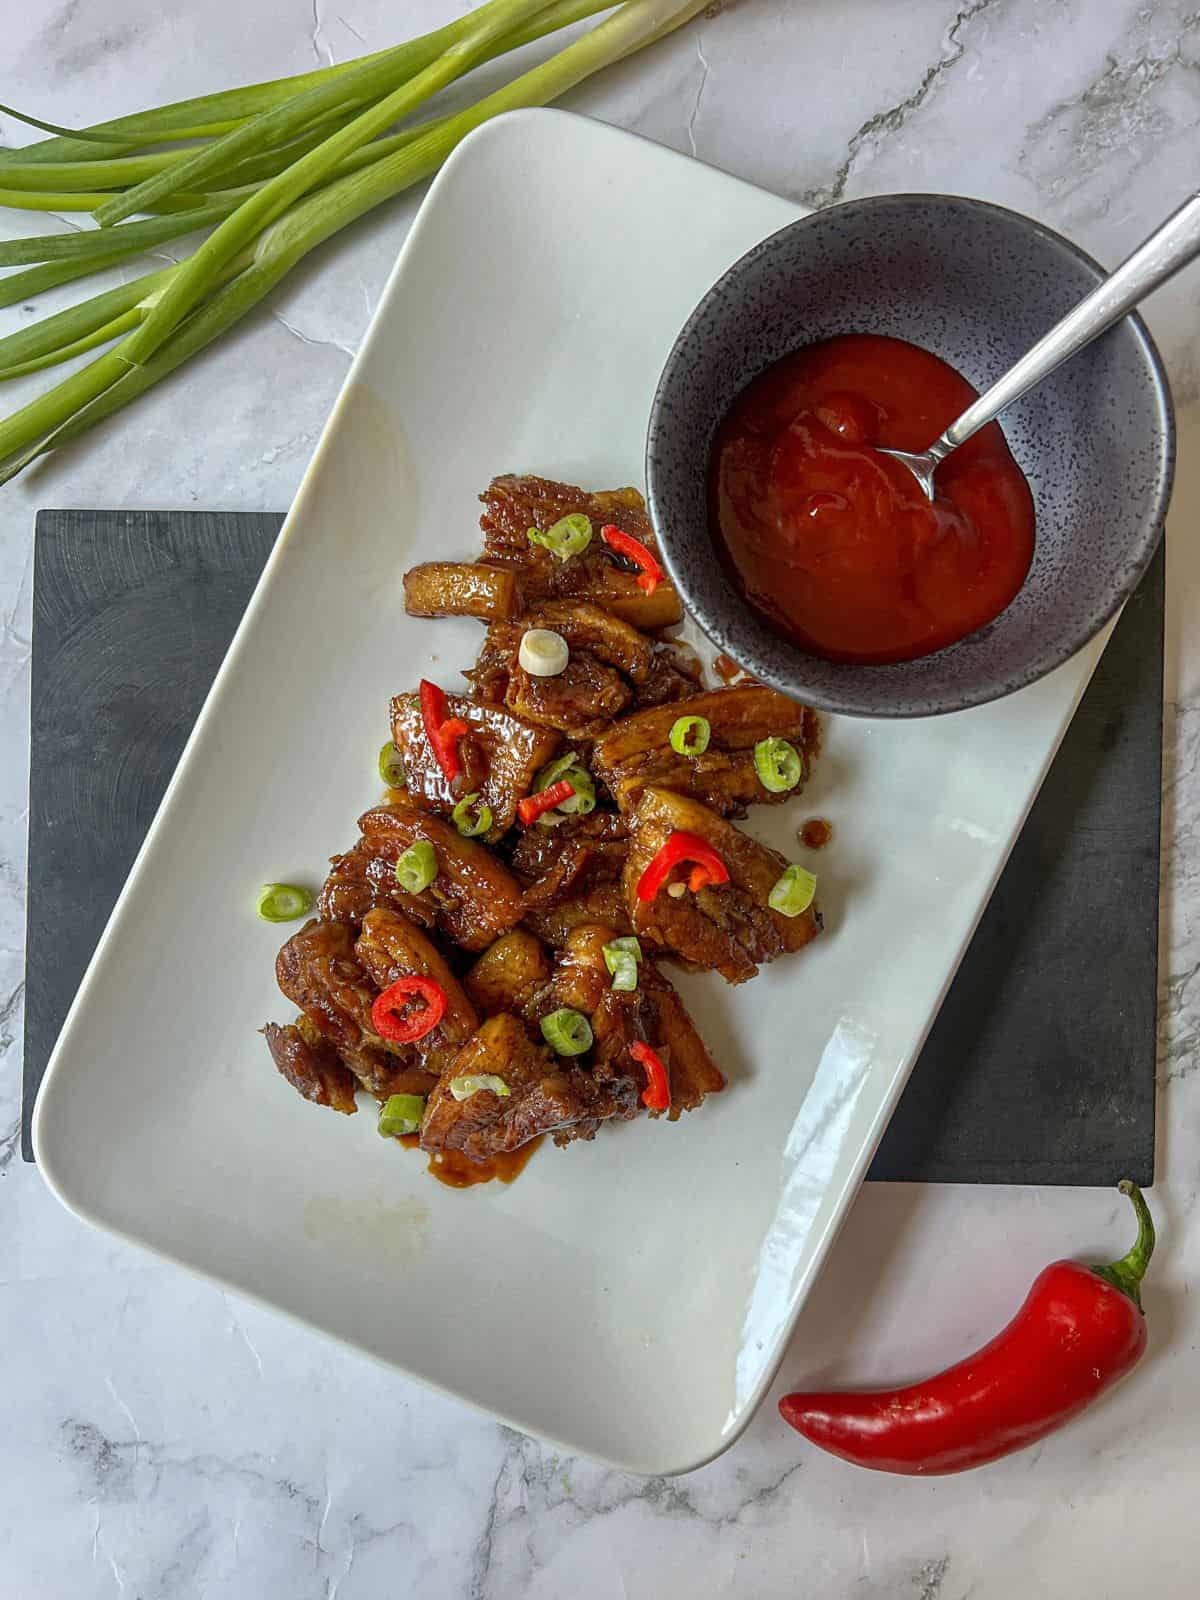 Chopped up pork belly slices in a sauce garnished with spring onion and chilli on a white plate. A bowl of dipping sauce is on the plate.